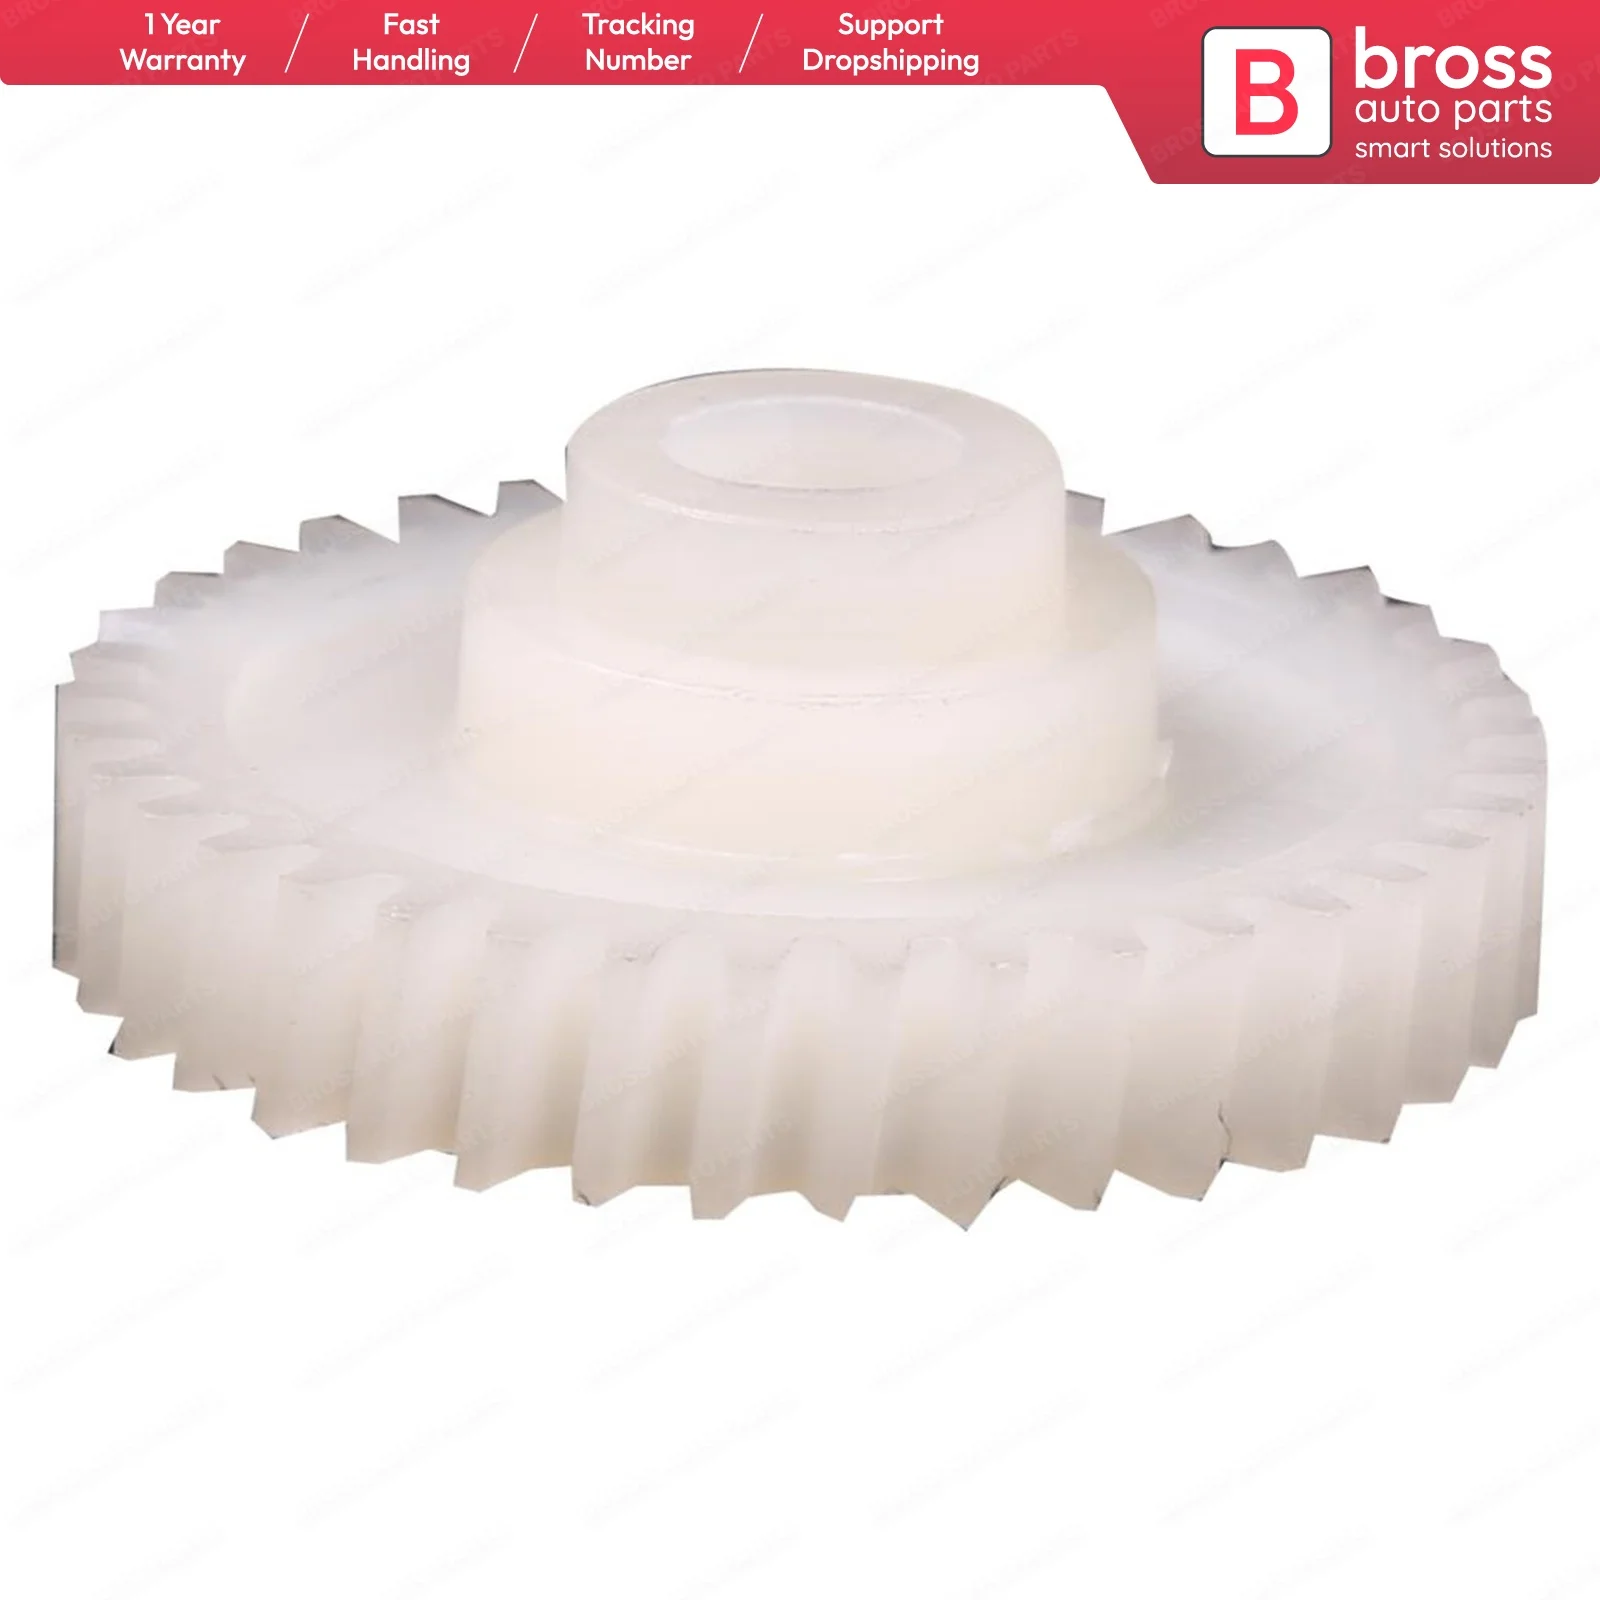 

Bross BSR16 Sunroof Motor Repair Gear for LAND ROVER NO:2 (Please check in the pictures before buying) Ship From Turkey